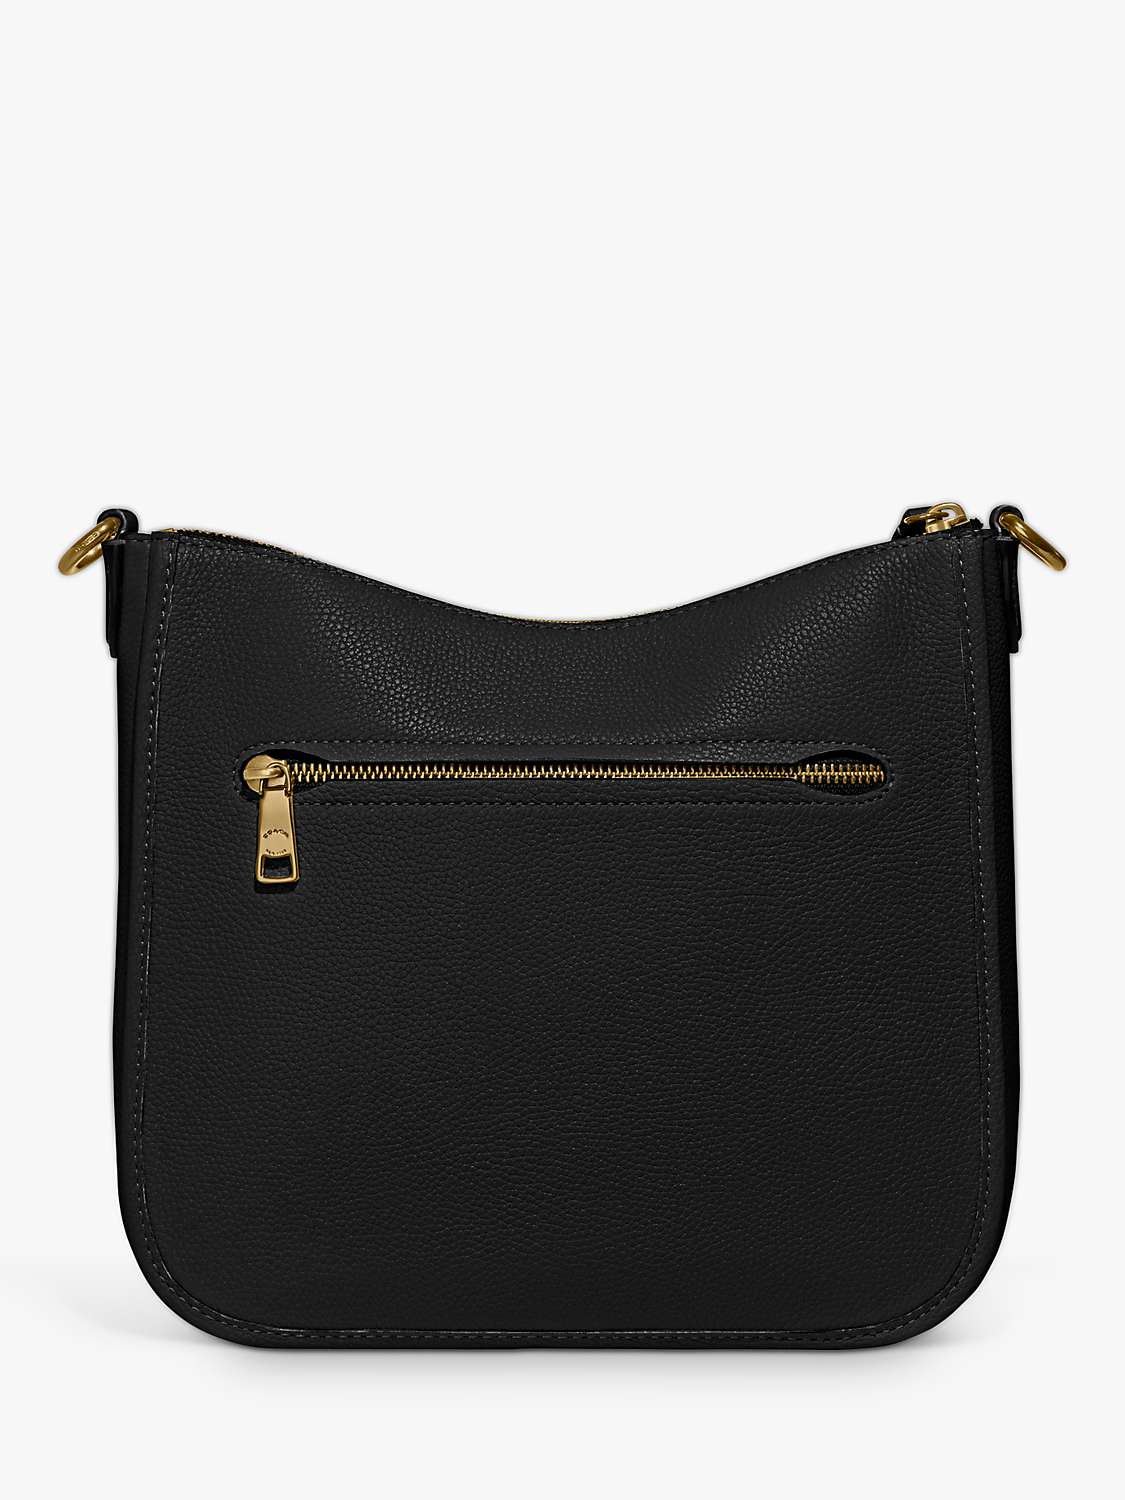 Coach Chaise Large Leather Cross Body Bag, Black at John Lewis & Partners